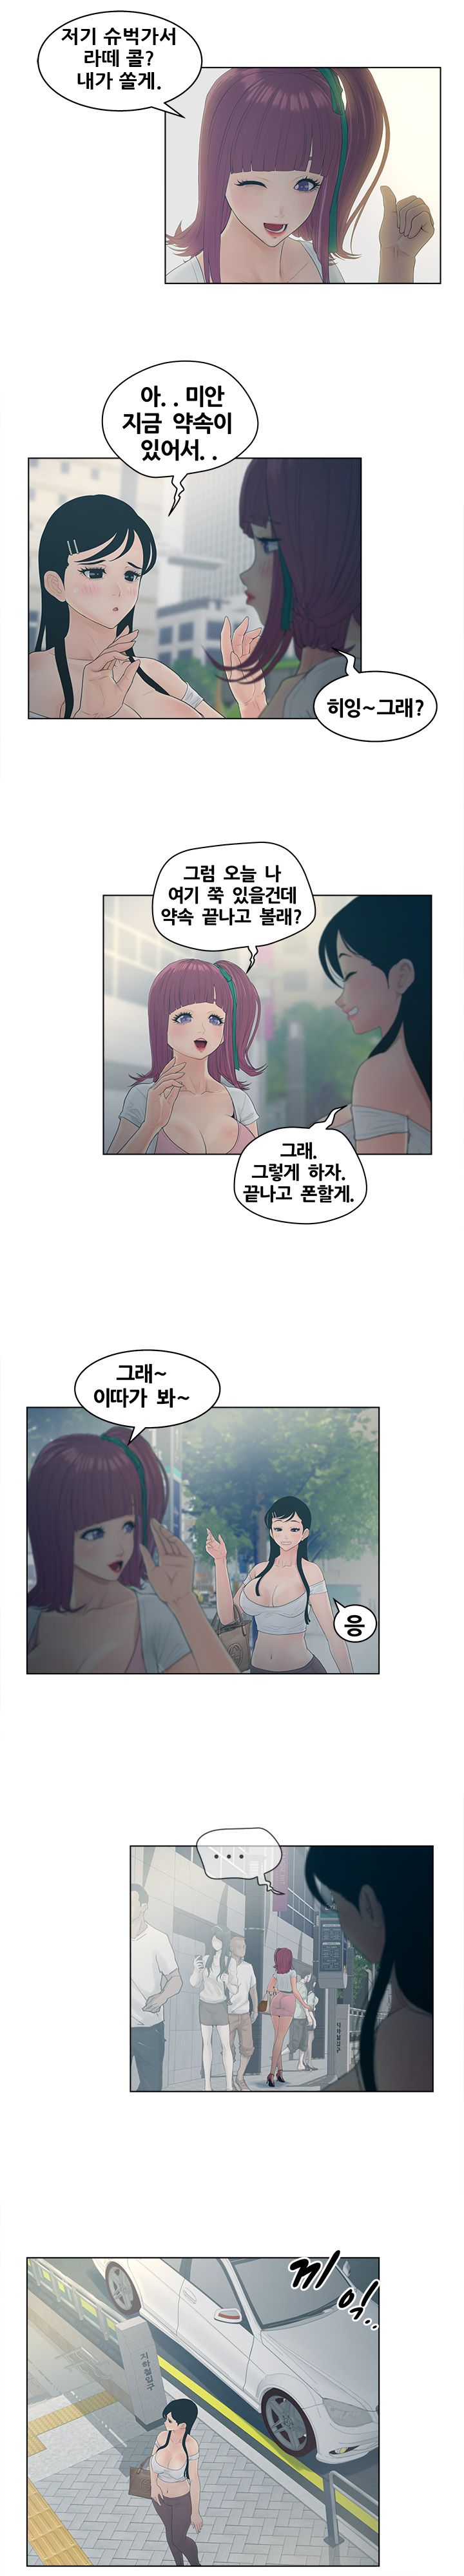 Share Girls Raw - Chapter 9 Page 6